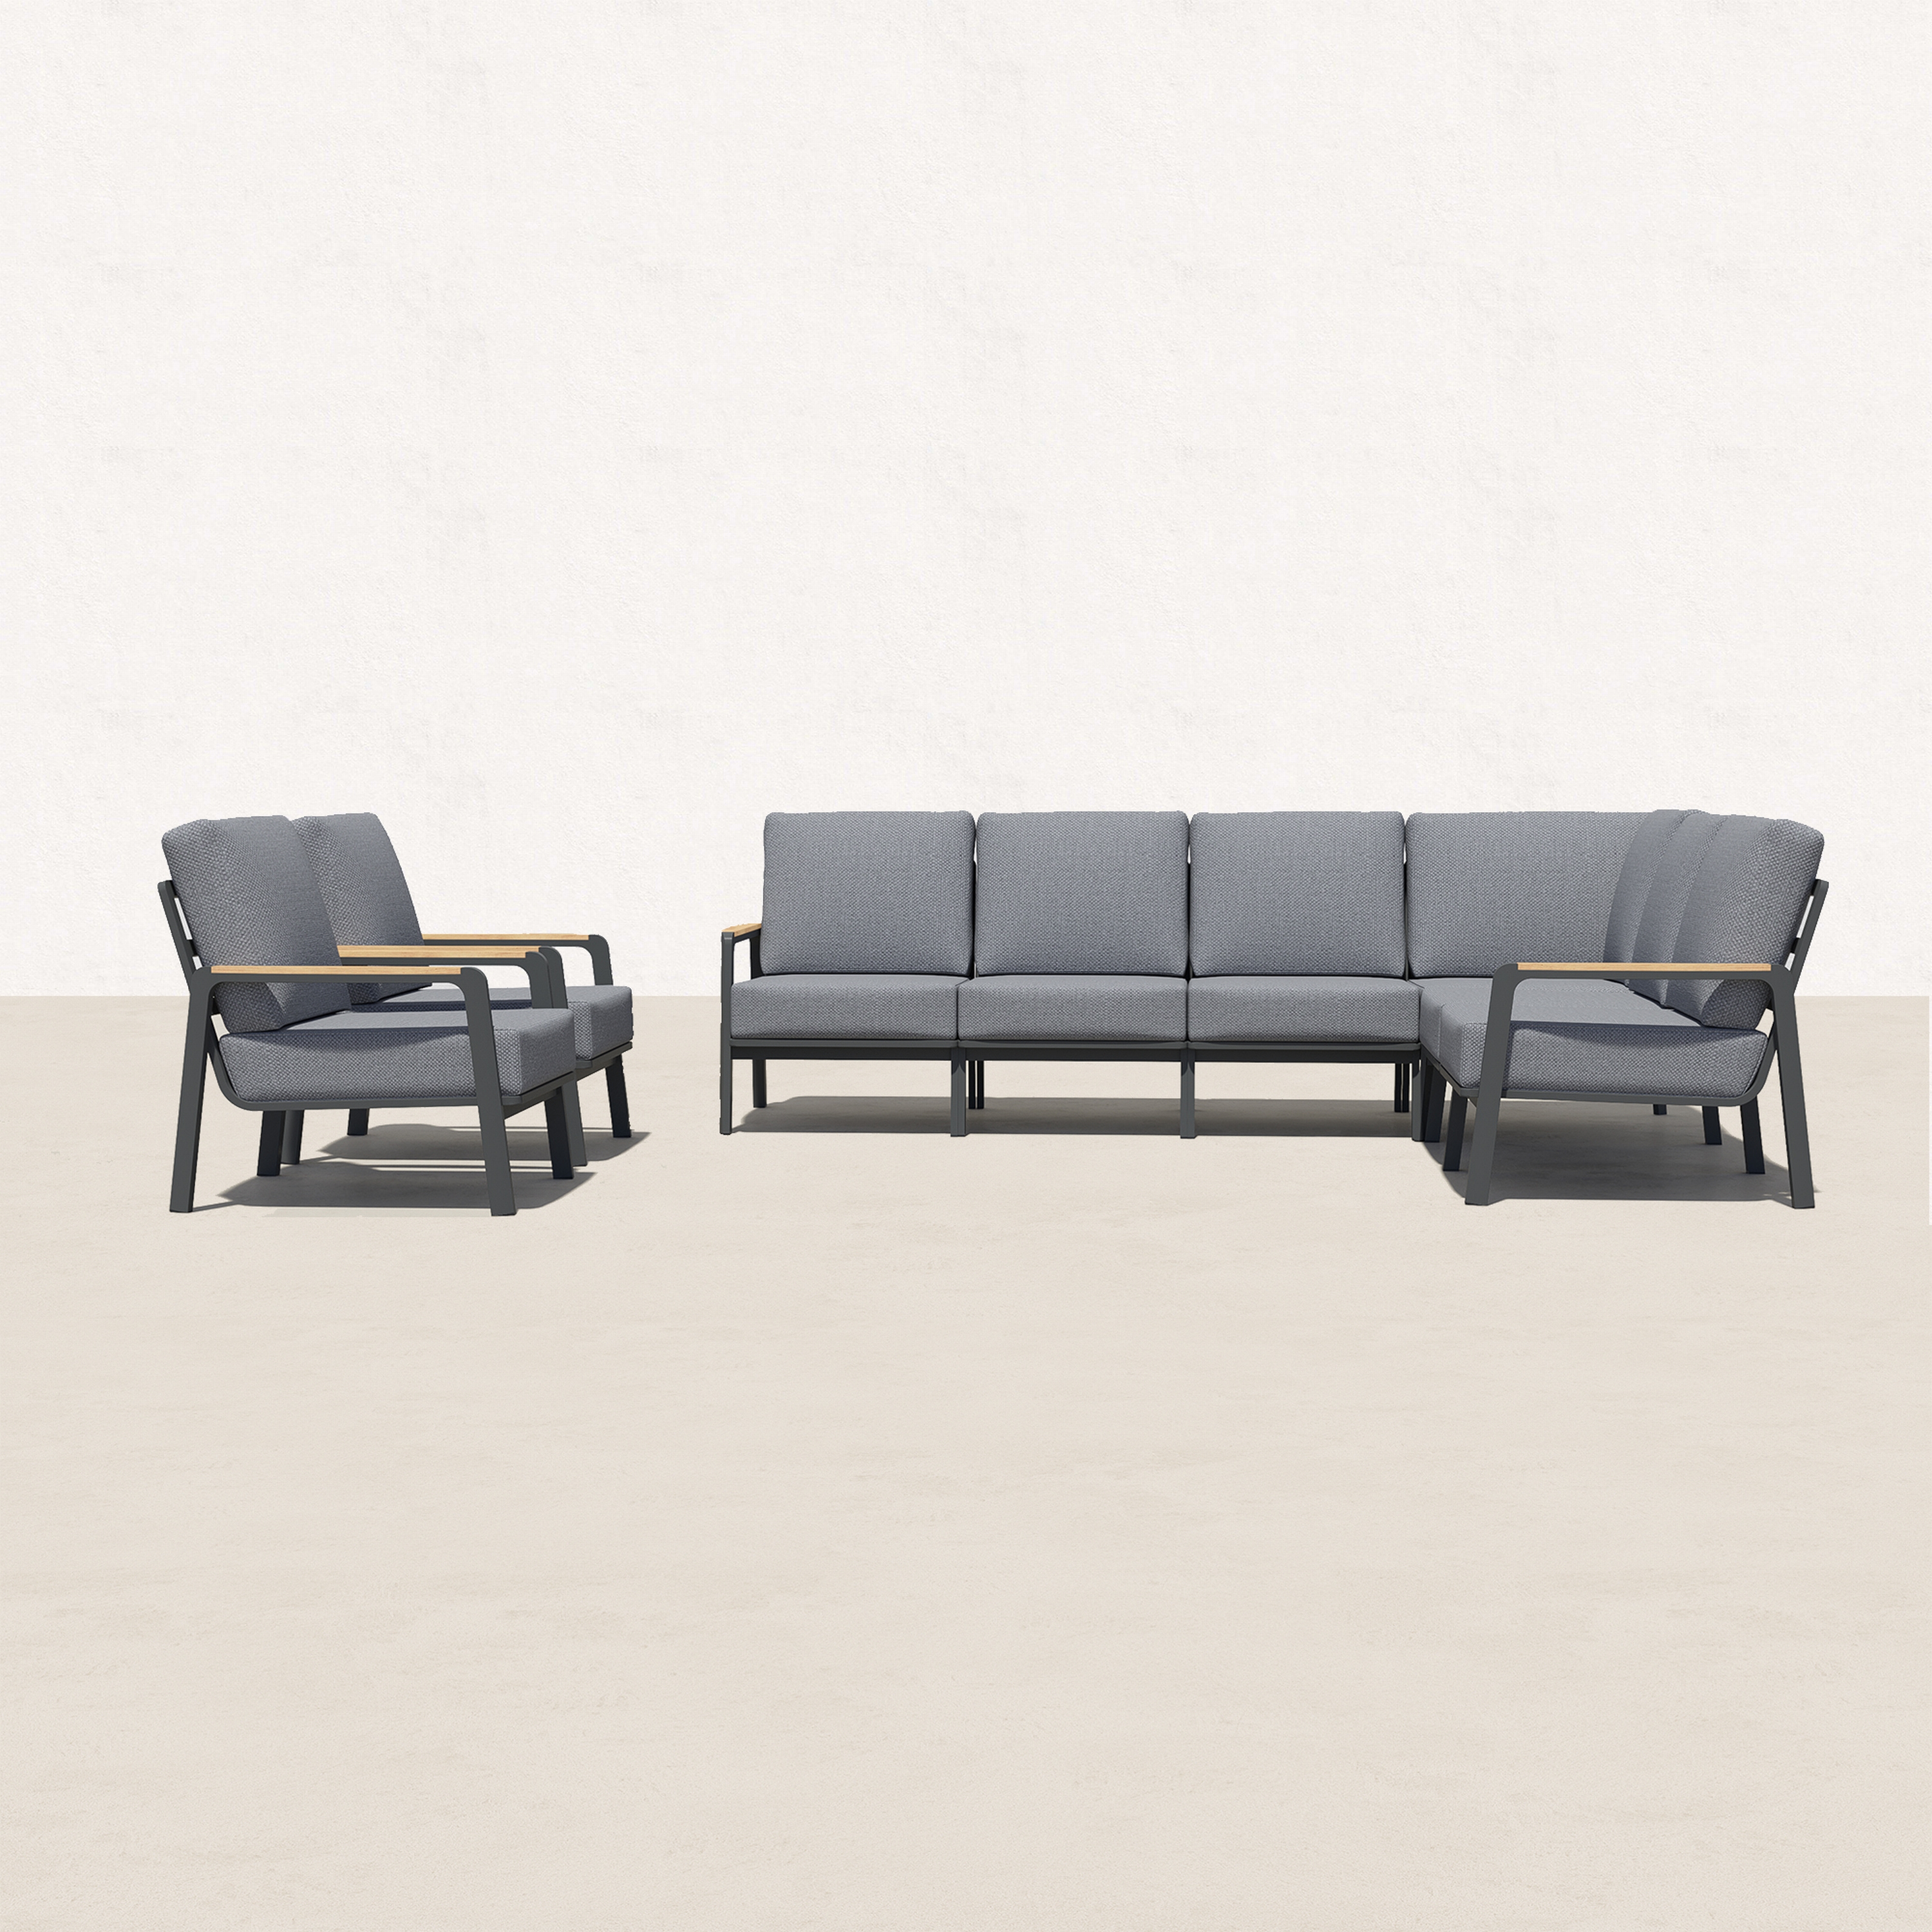 Orion Teak Outdoor L Sectional with Armchairs - 8 Seat -Baeryon Furniture